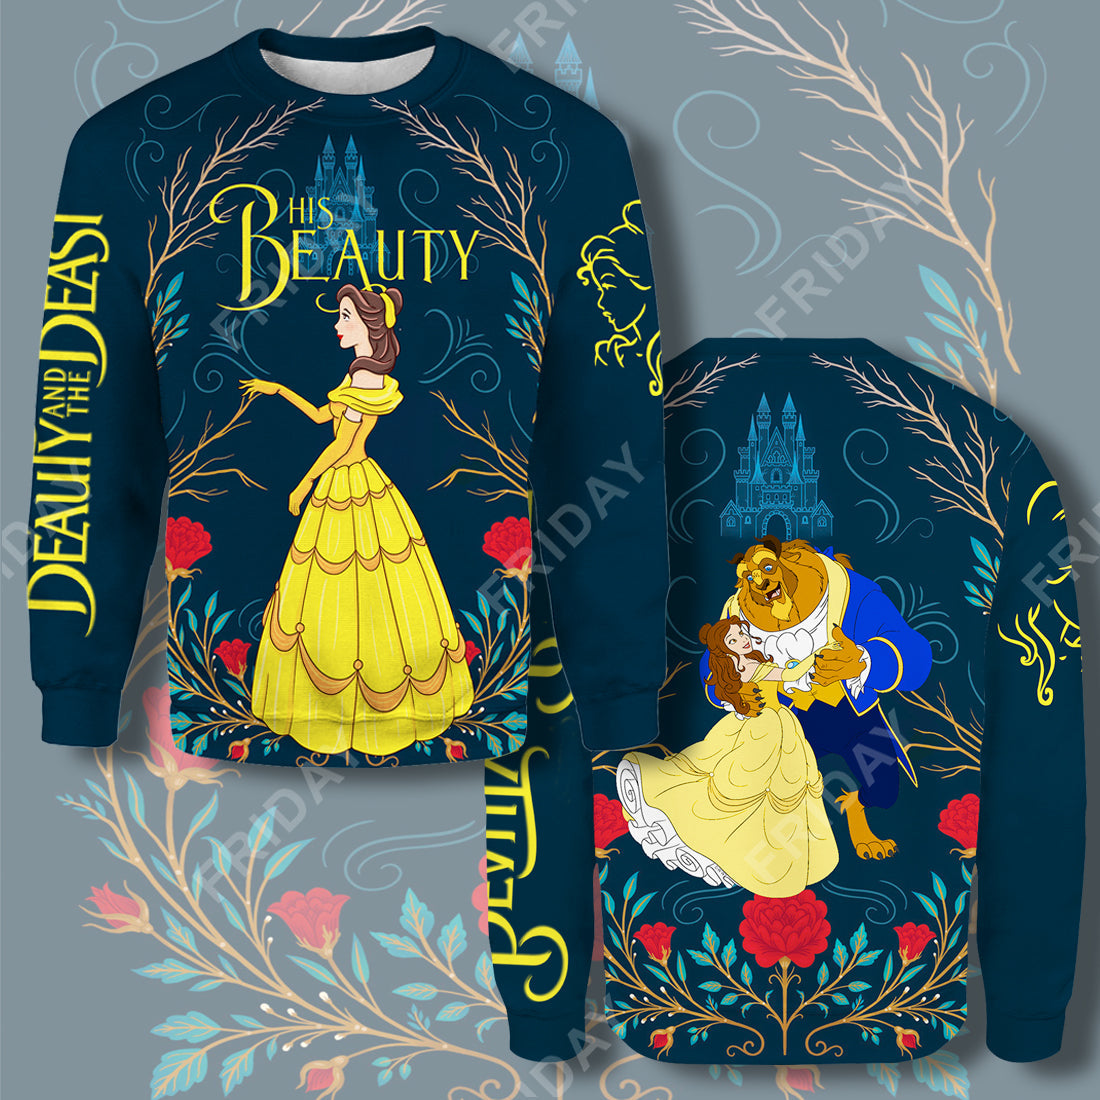 Unifinz DN T-shirt Beauty & The Beast His Beauty Couple 3D Print T-shirt Awesome DN Beauty & The Beast Hoodie Sweater Tank 2024